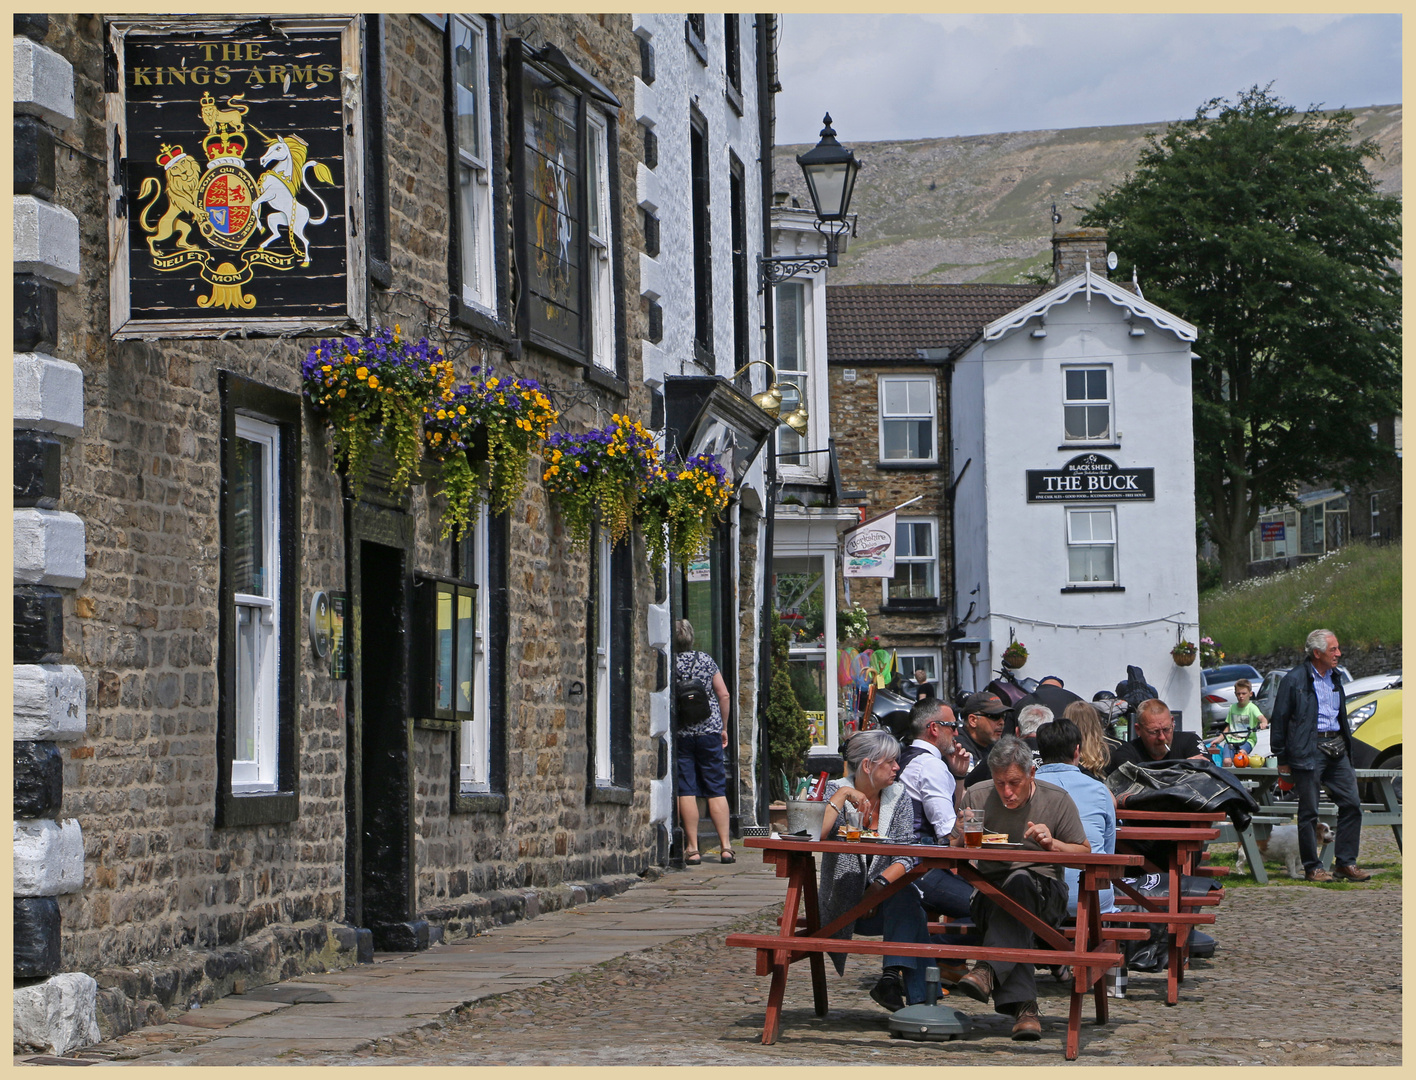 the Kings Arms and the Buck at Reeth